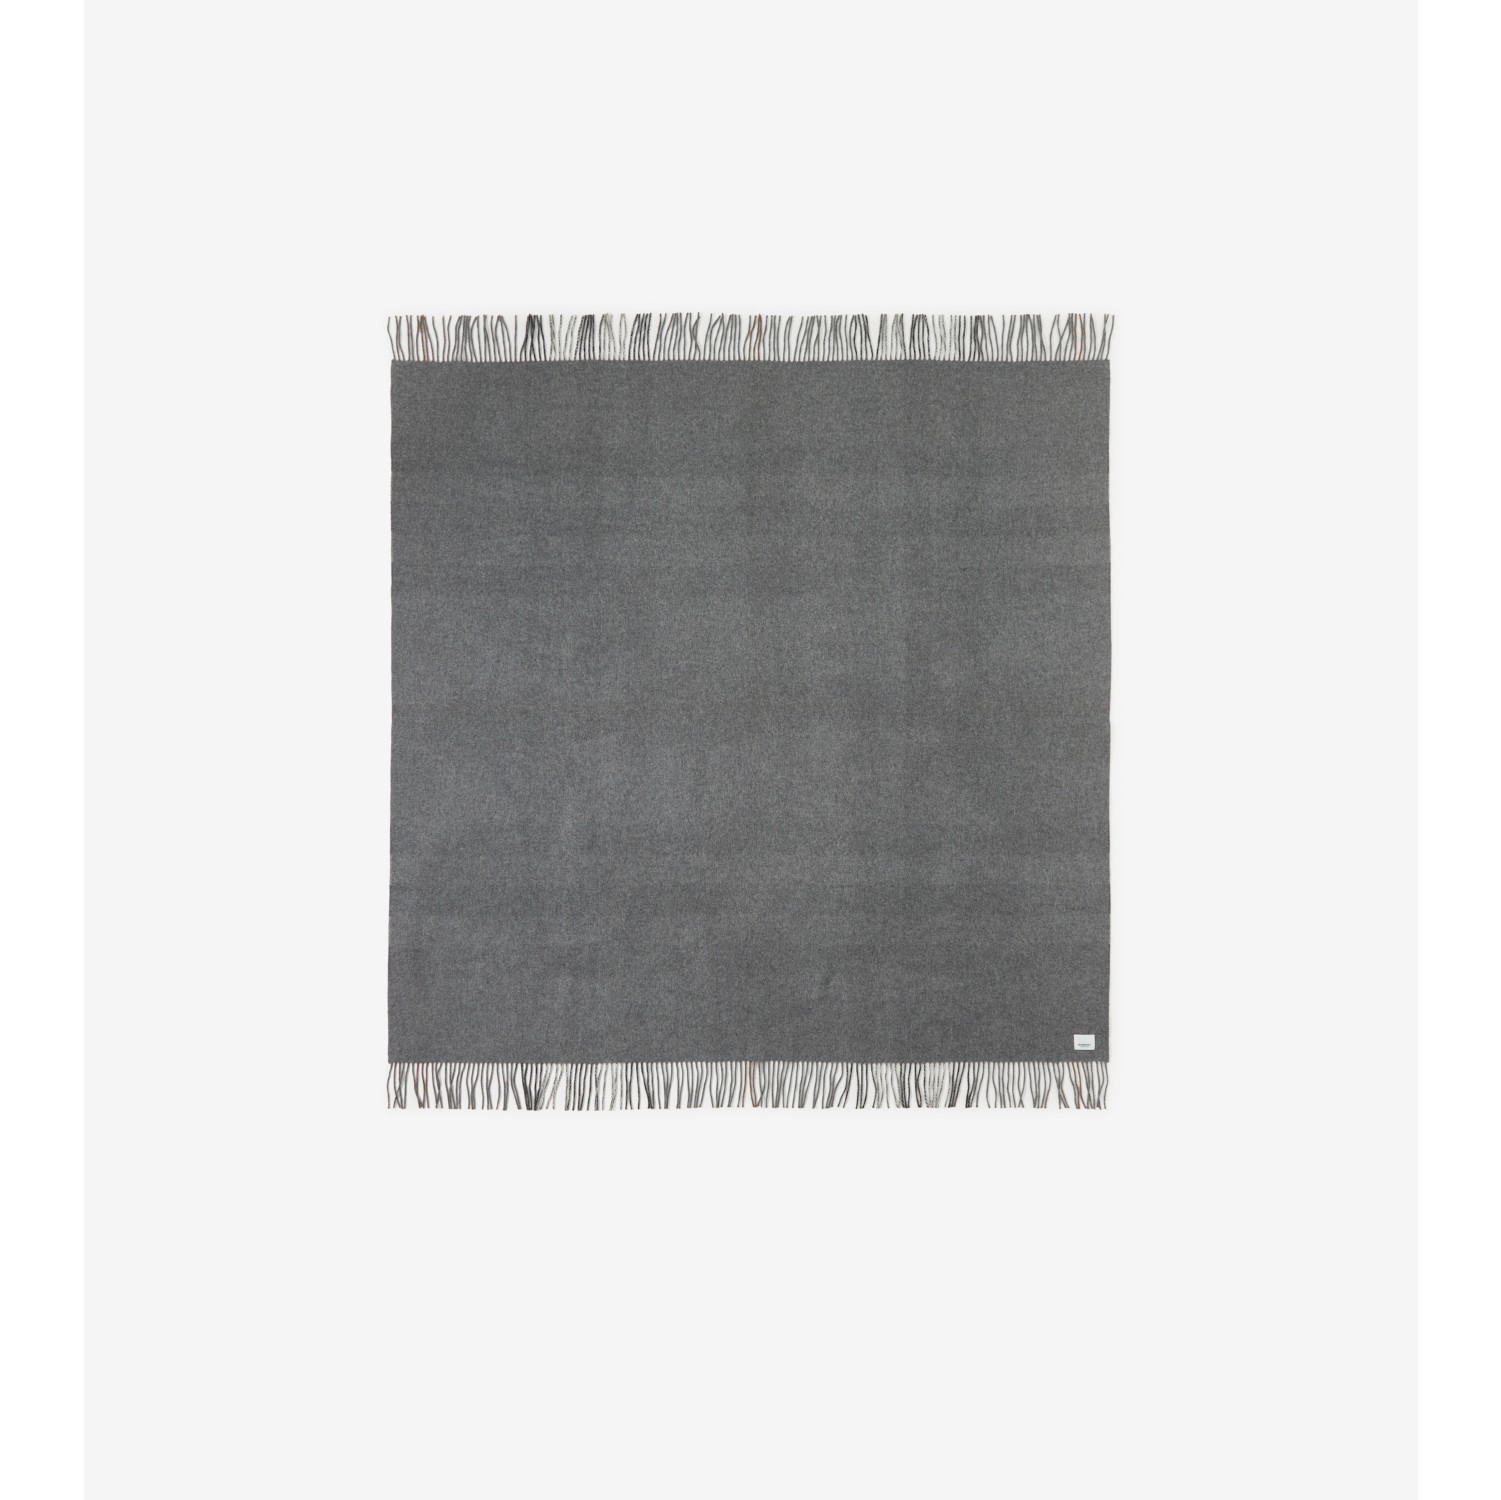 Exaggerated Check Cashmere Blanket